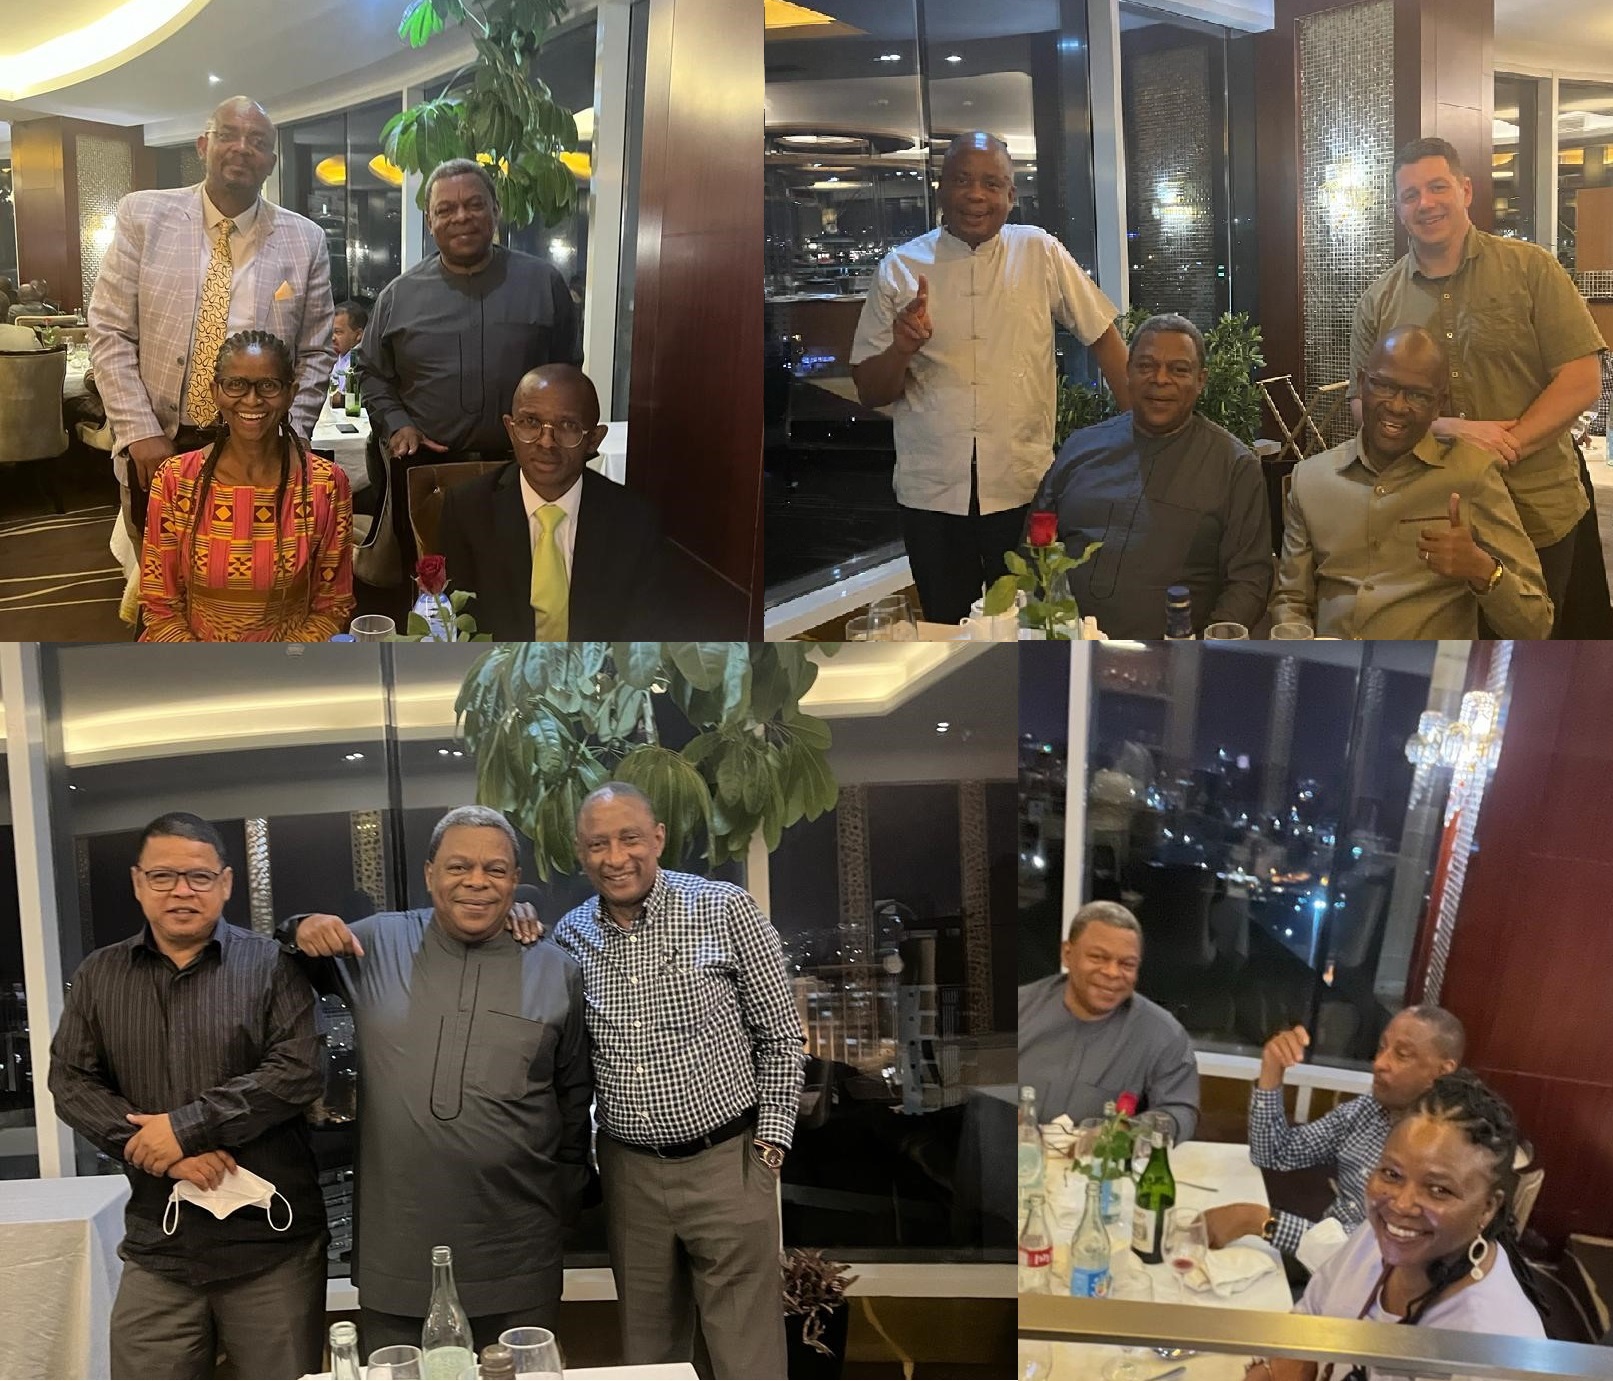 On 31 March 2022, Brig. General Nkukwana: Defence Attaché Multilateral at the South African Embassy in Ethiopia, hosted a farewell function for Mr Sivuyile Bam: Head of Peace Support Operations Division (PSOD) at the African Union.